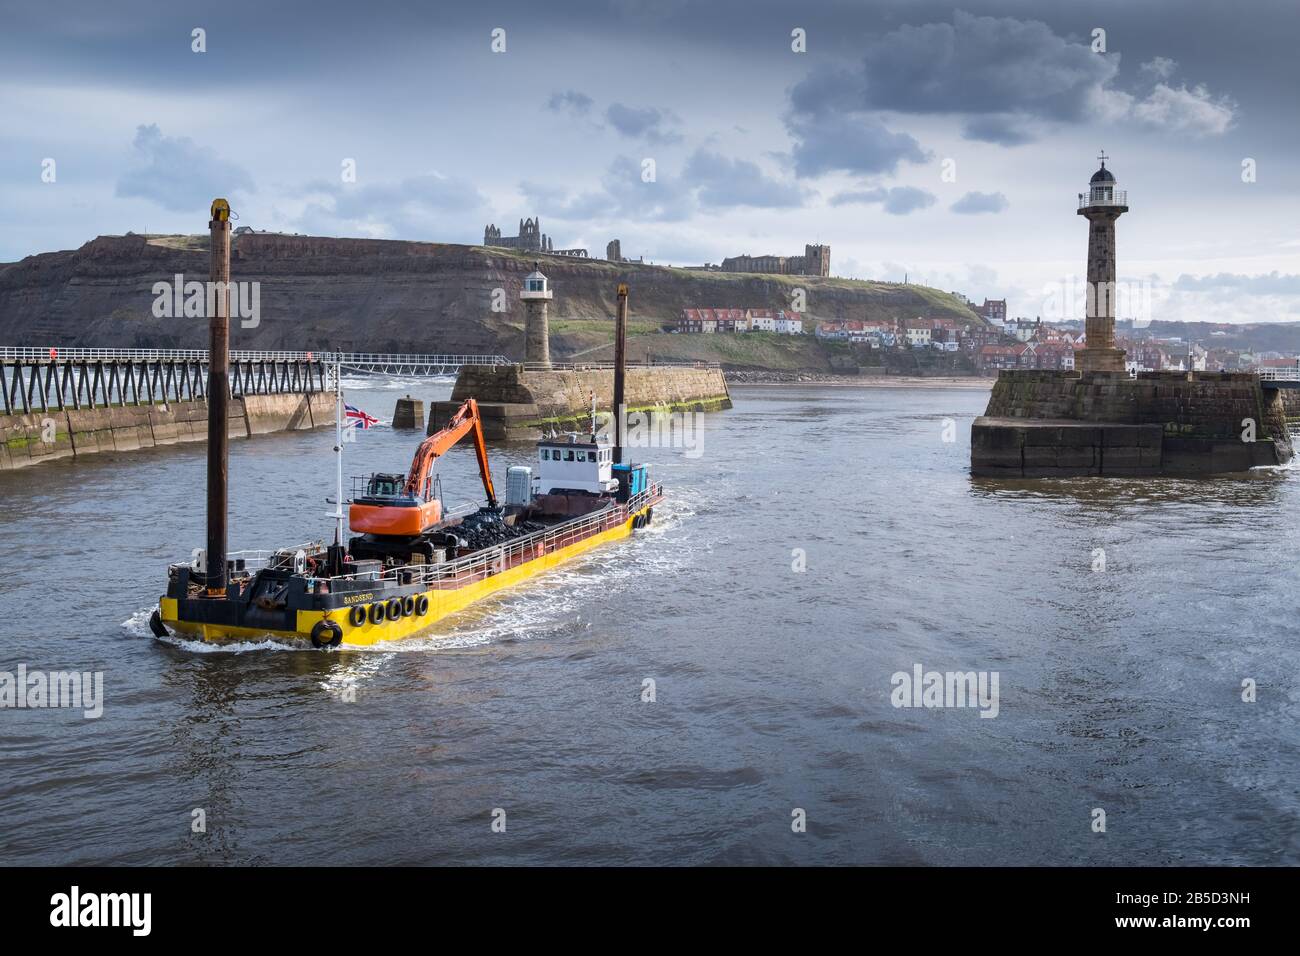 The Sandsend dredging boat leaves Whitby taking refuse from the harbour bed out to sea, North Yorkshire, England, UK Stock Photo